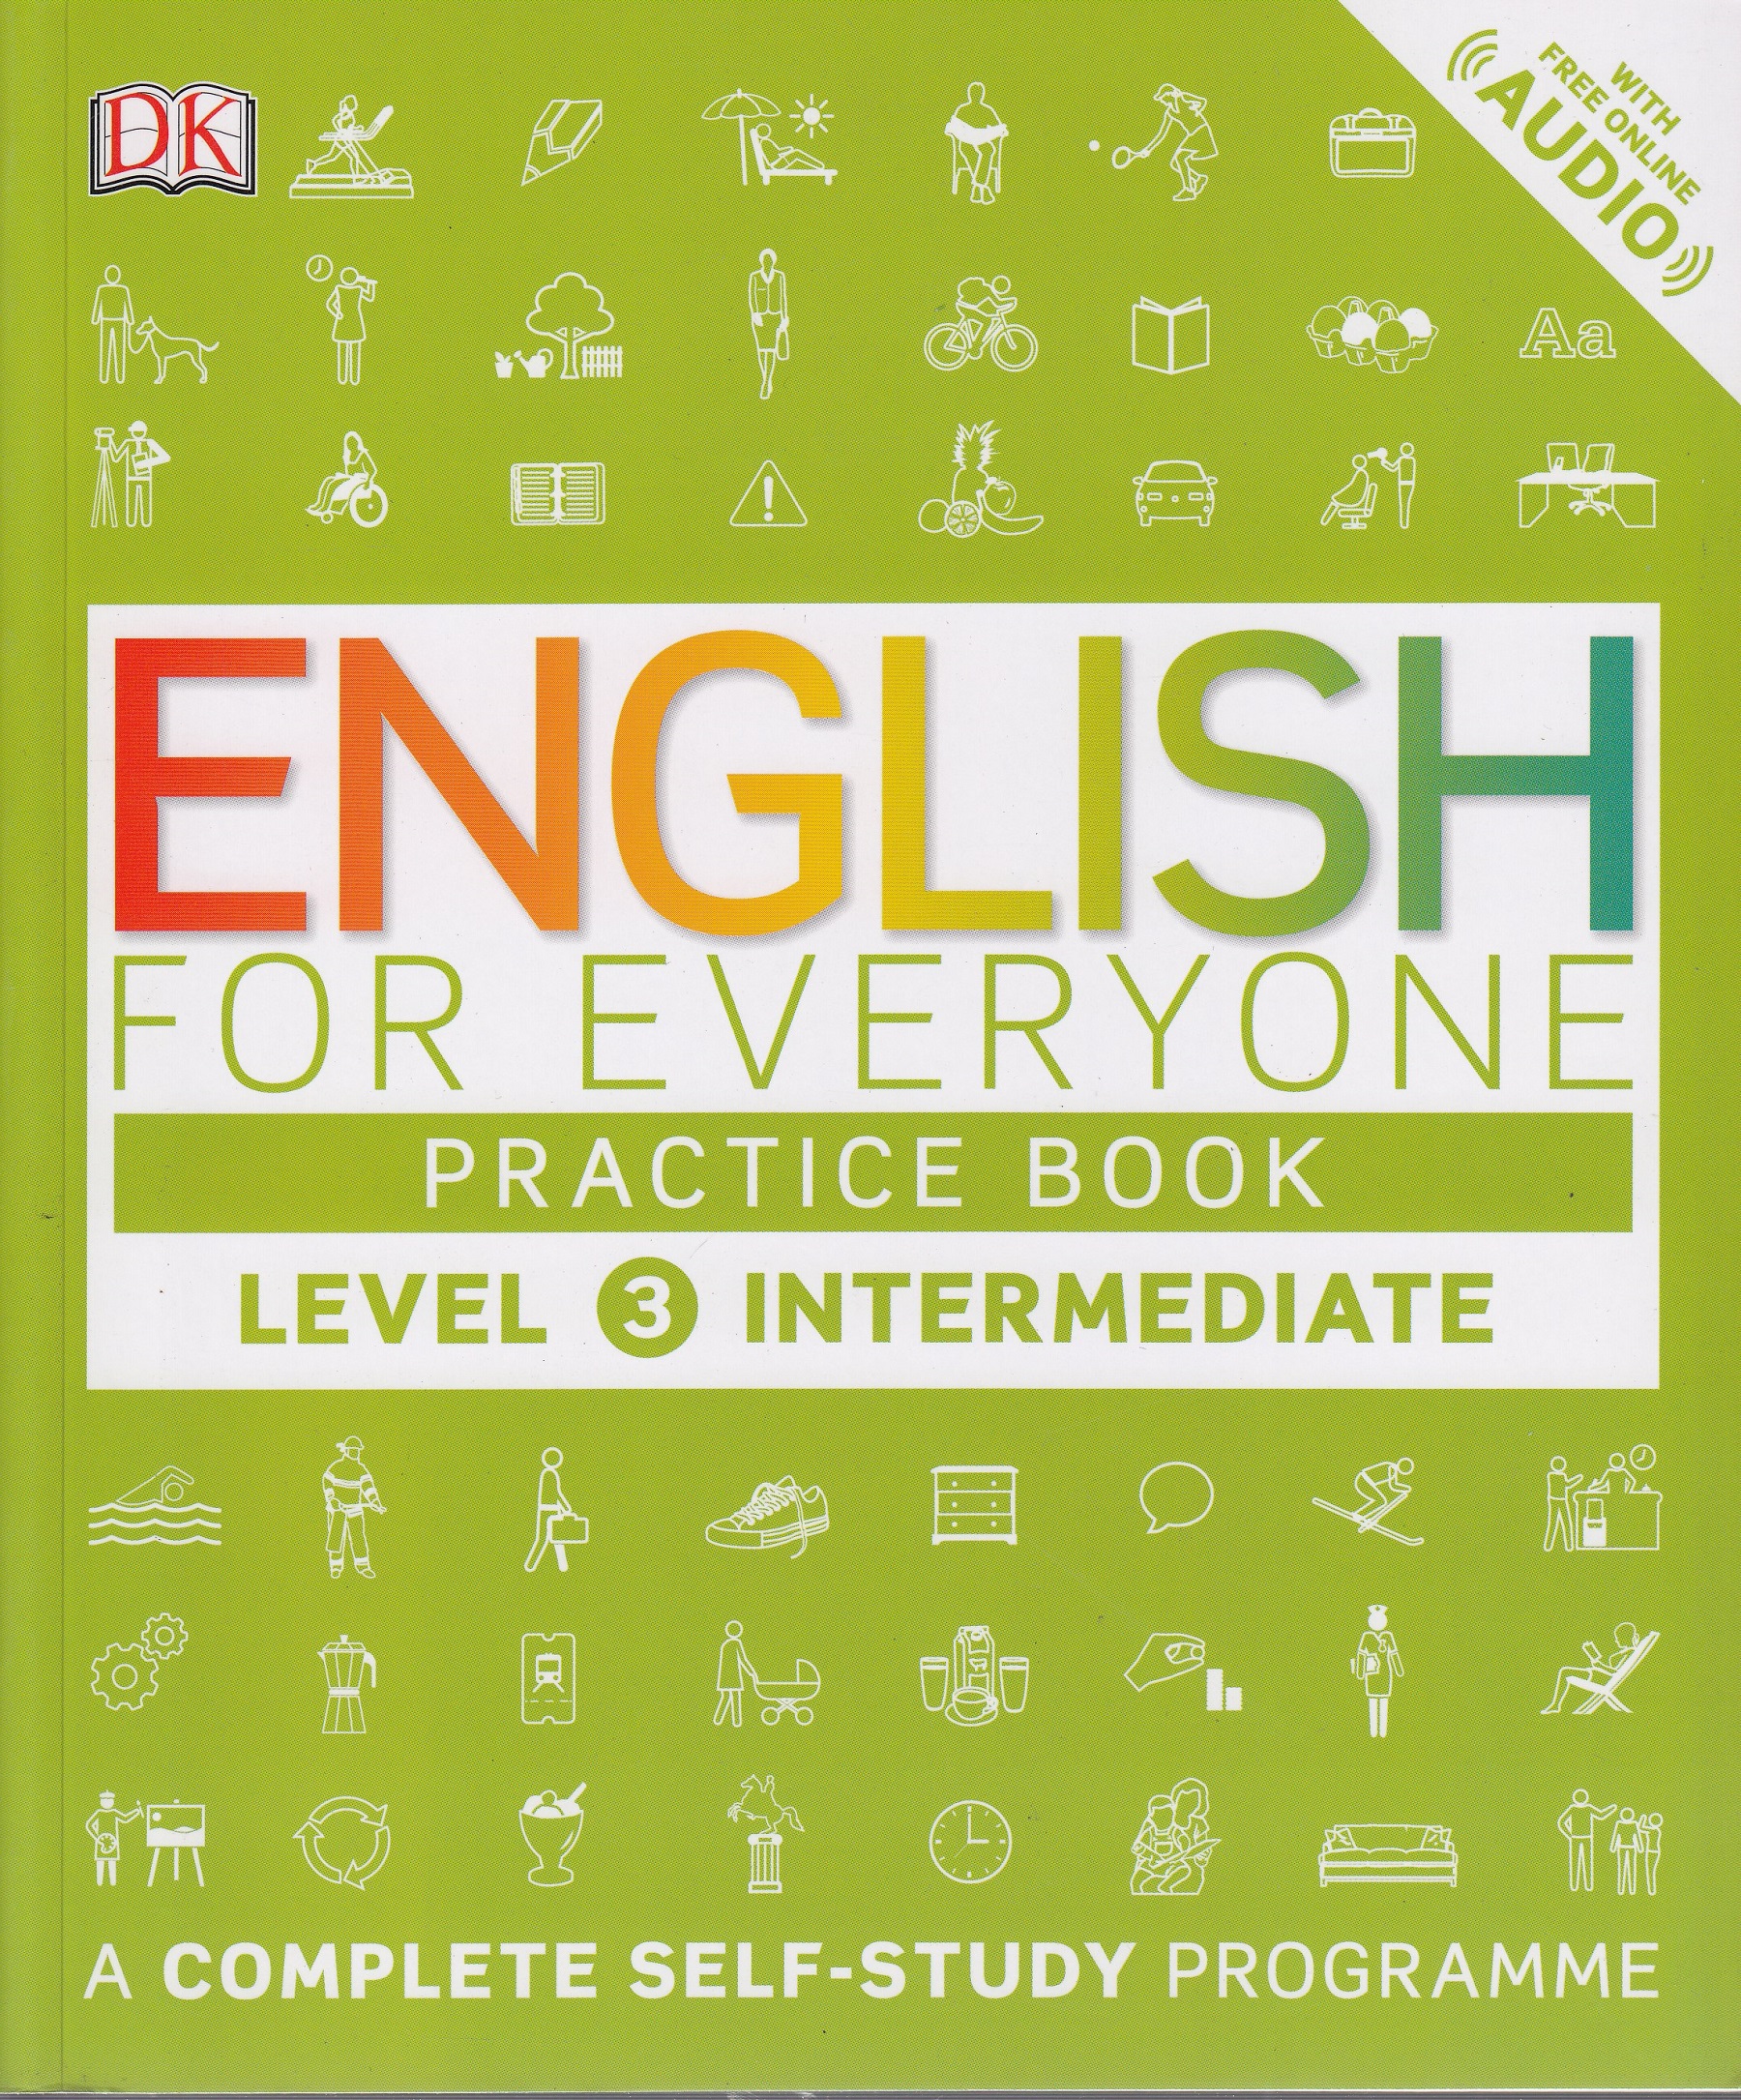 DK Today-ENGLISH FOR EVERYONE 3 PRACTICE BOOK